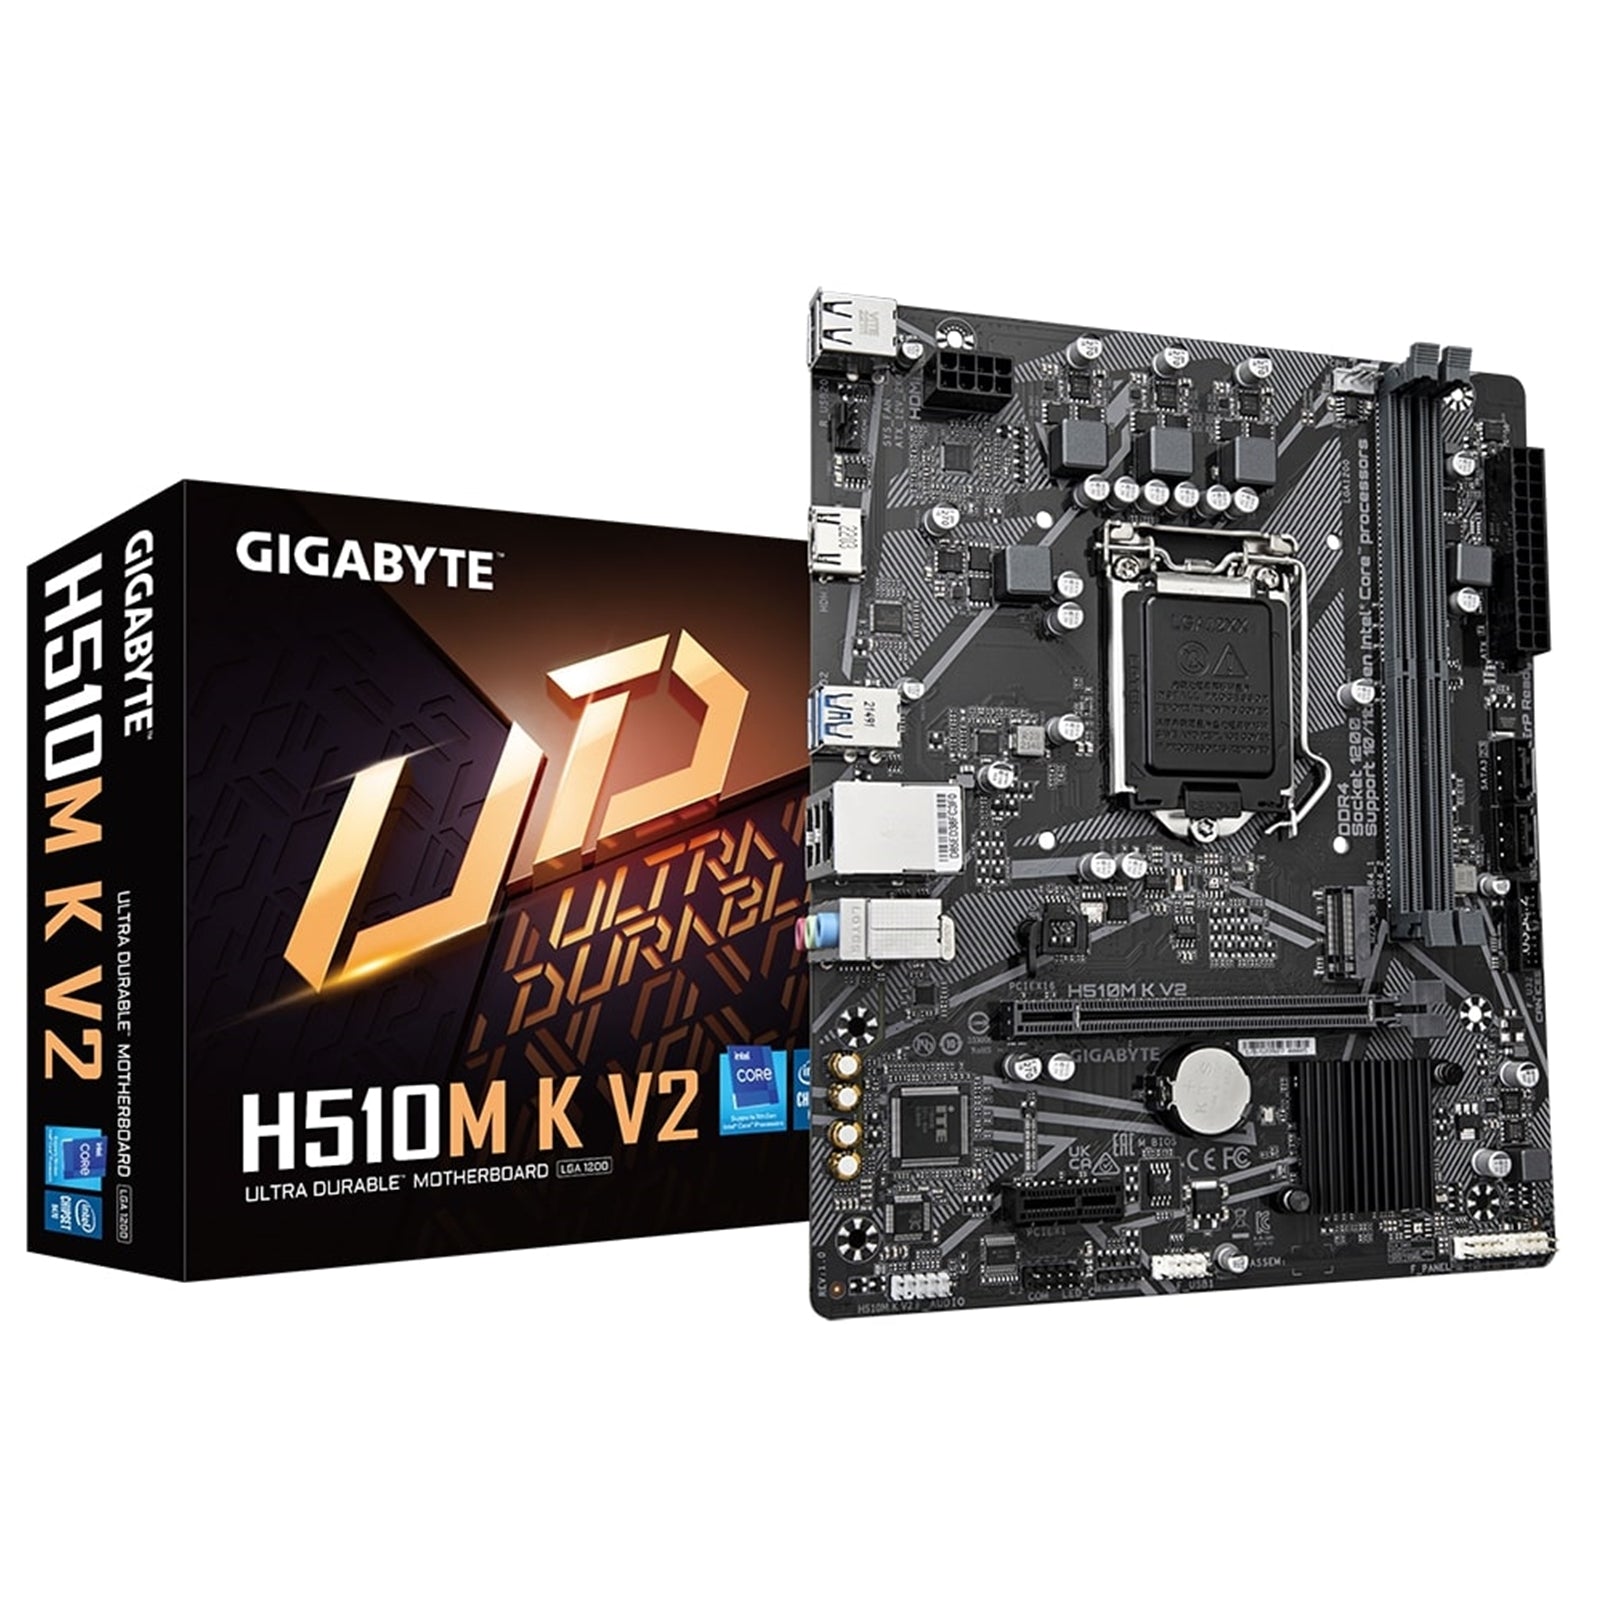 Gigabyte H510M K V2 The Ultimate Gaming Motherboard with Advanced Cooling and Audio Technologies